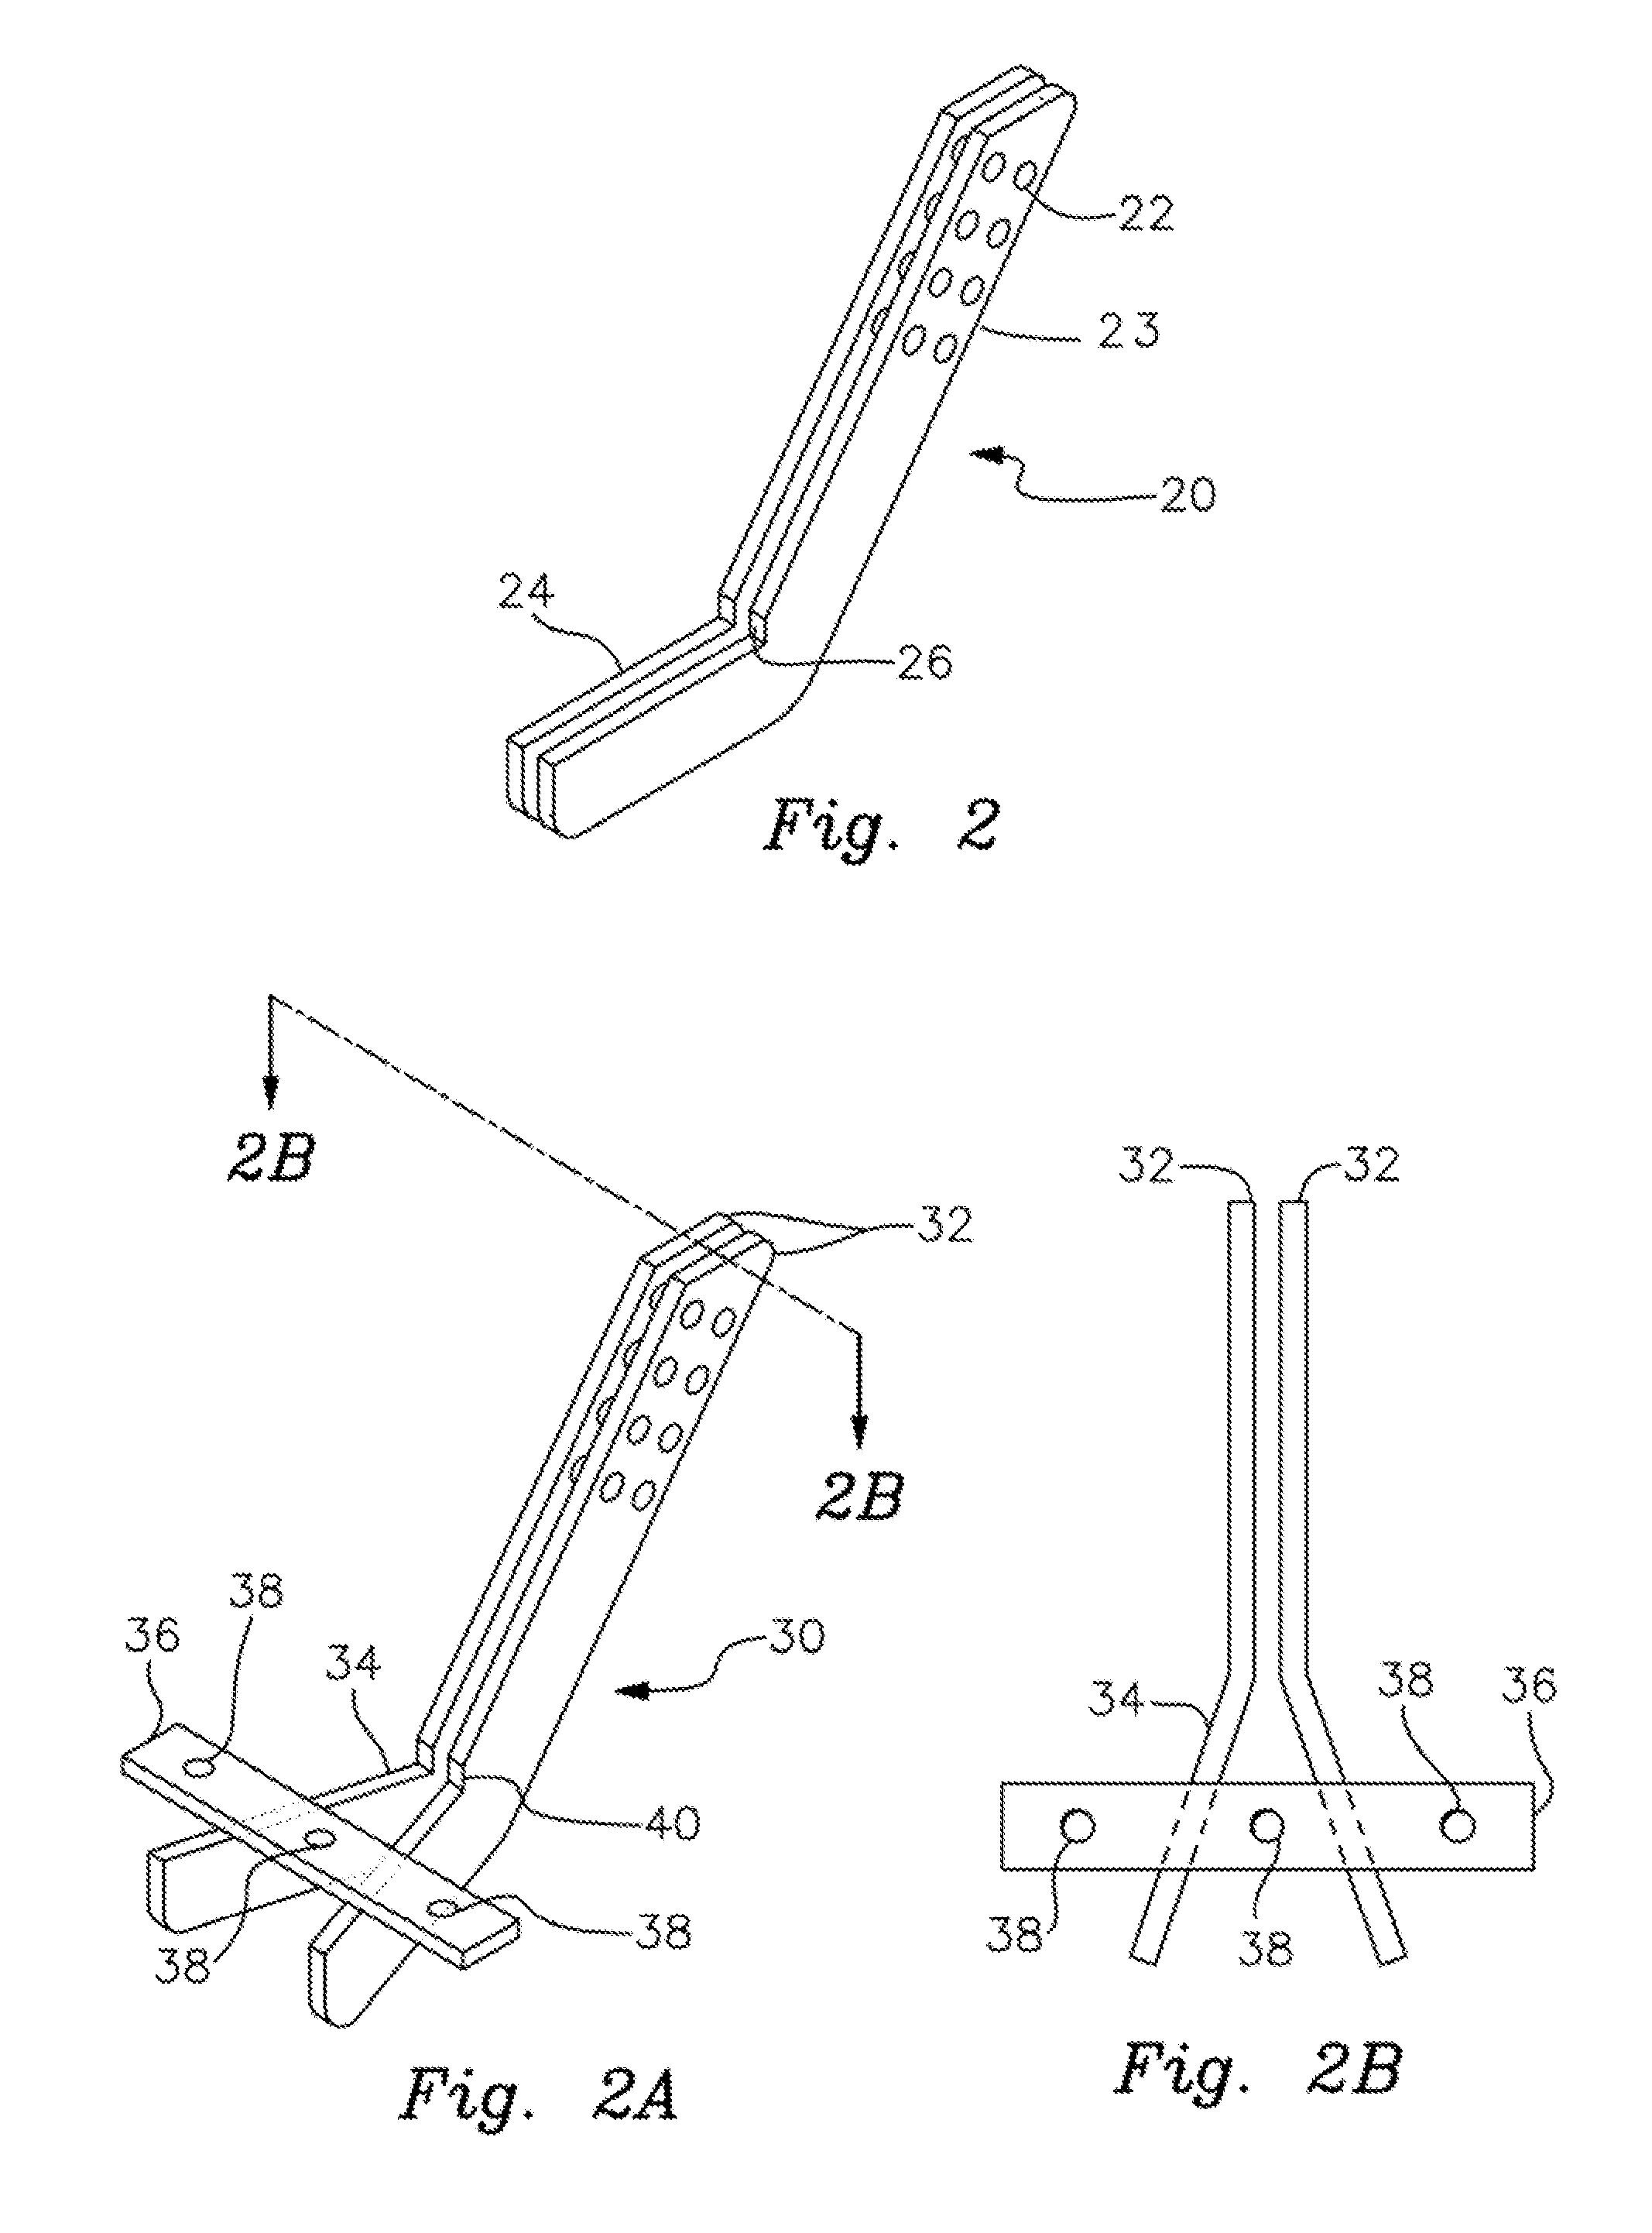 Moveable step for assisting entry into vehicles